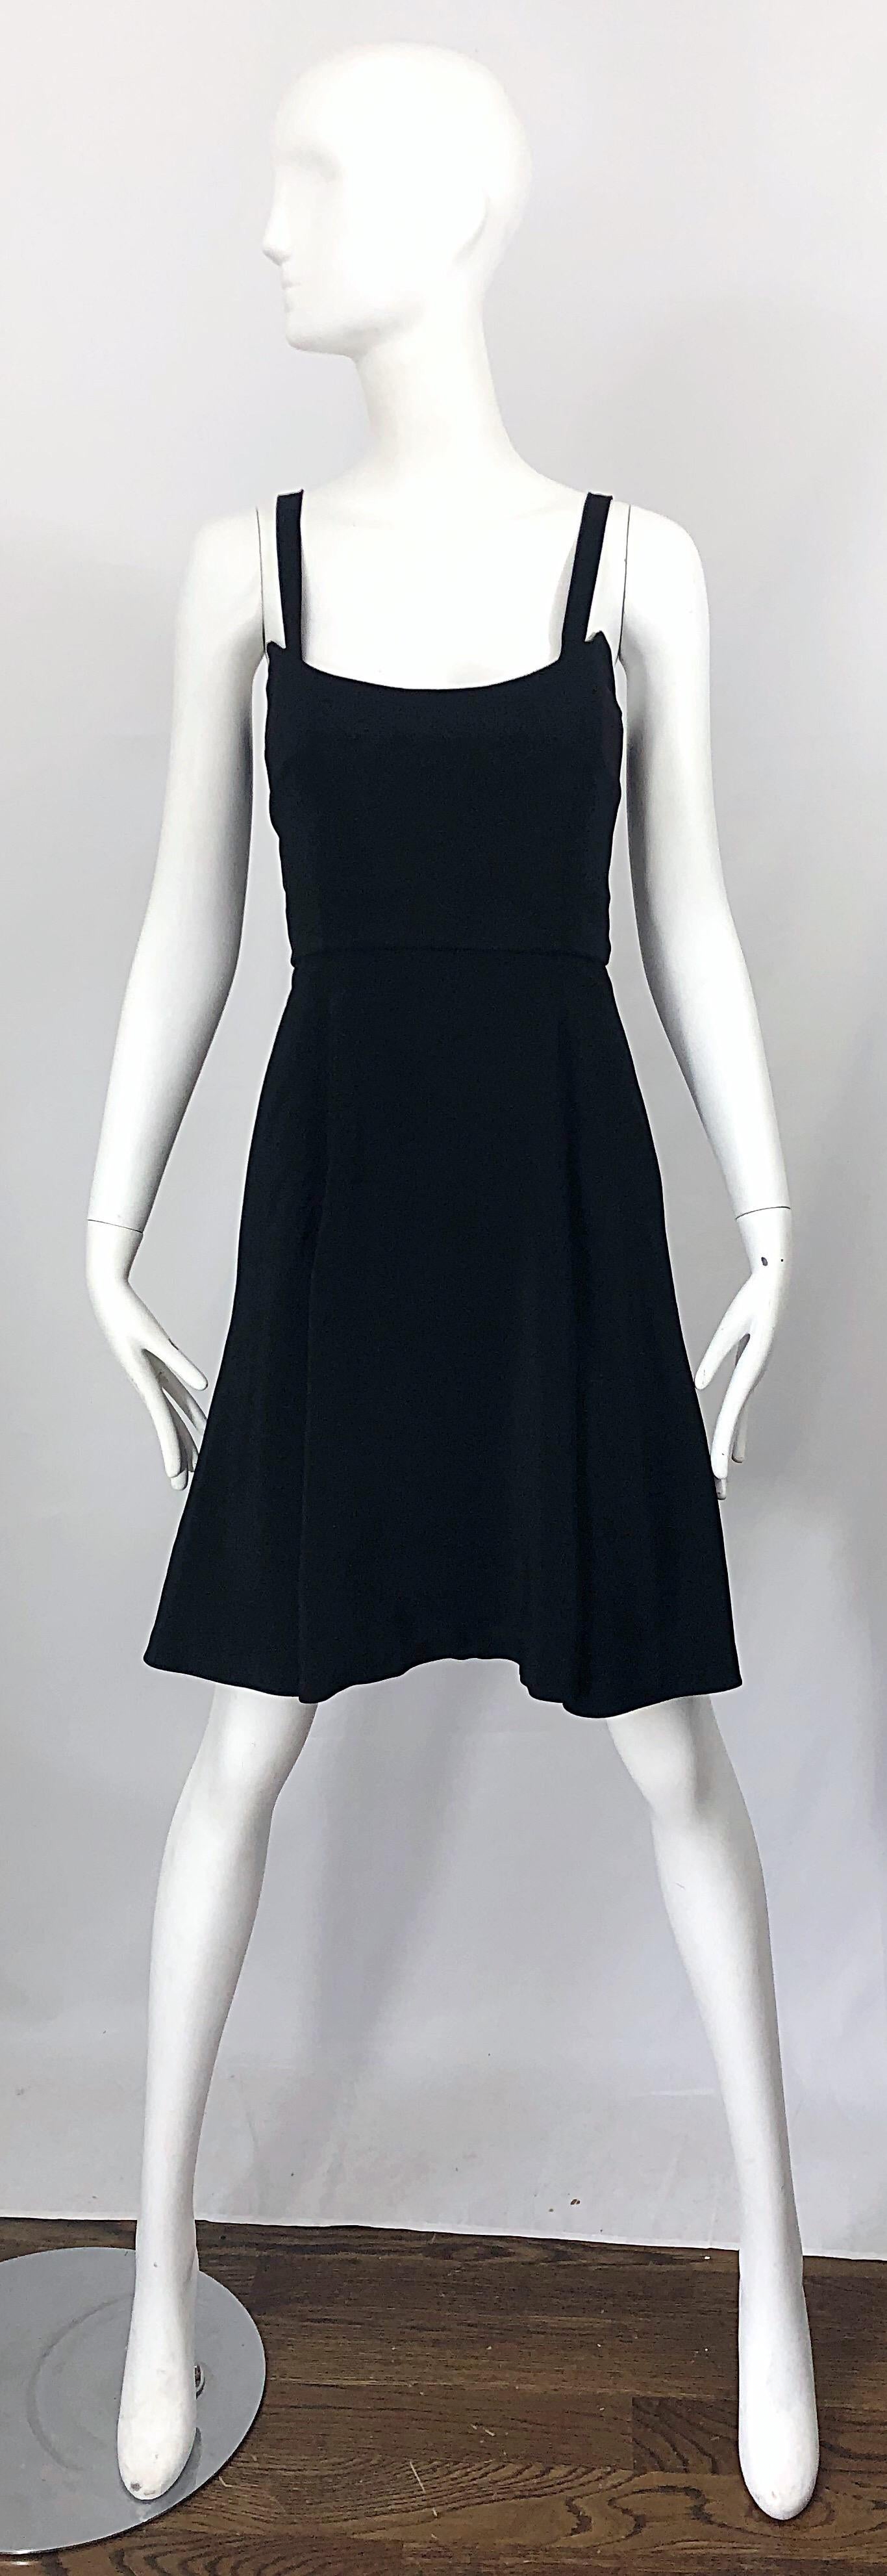 1990s Christian Lacroix Avant Garde Size 36 2 /4 Vintage Black 90s Skater Dress In Excellent Condition For Sale In San Diego, CA